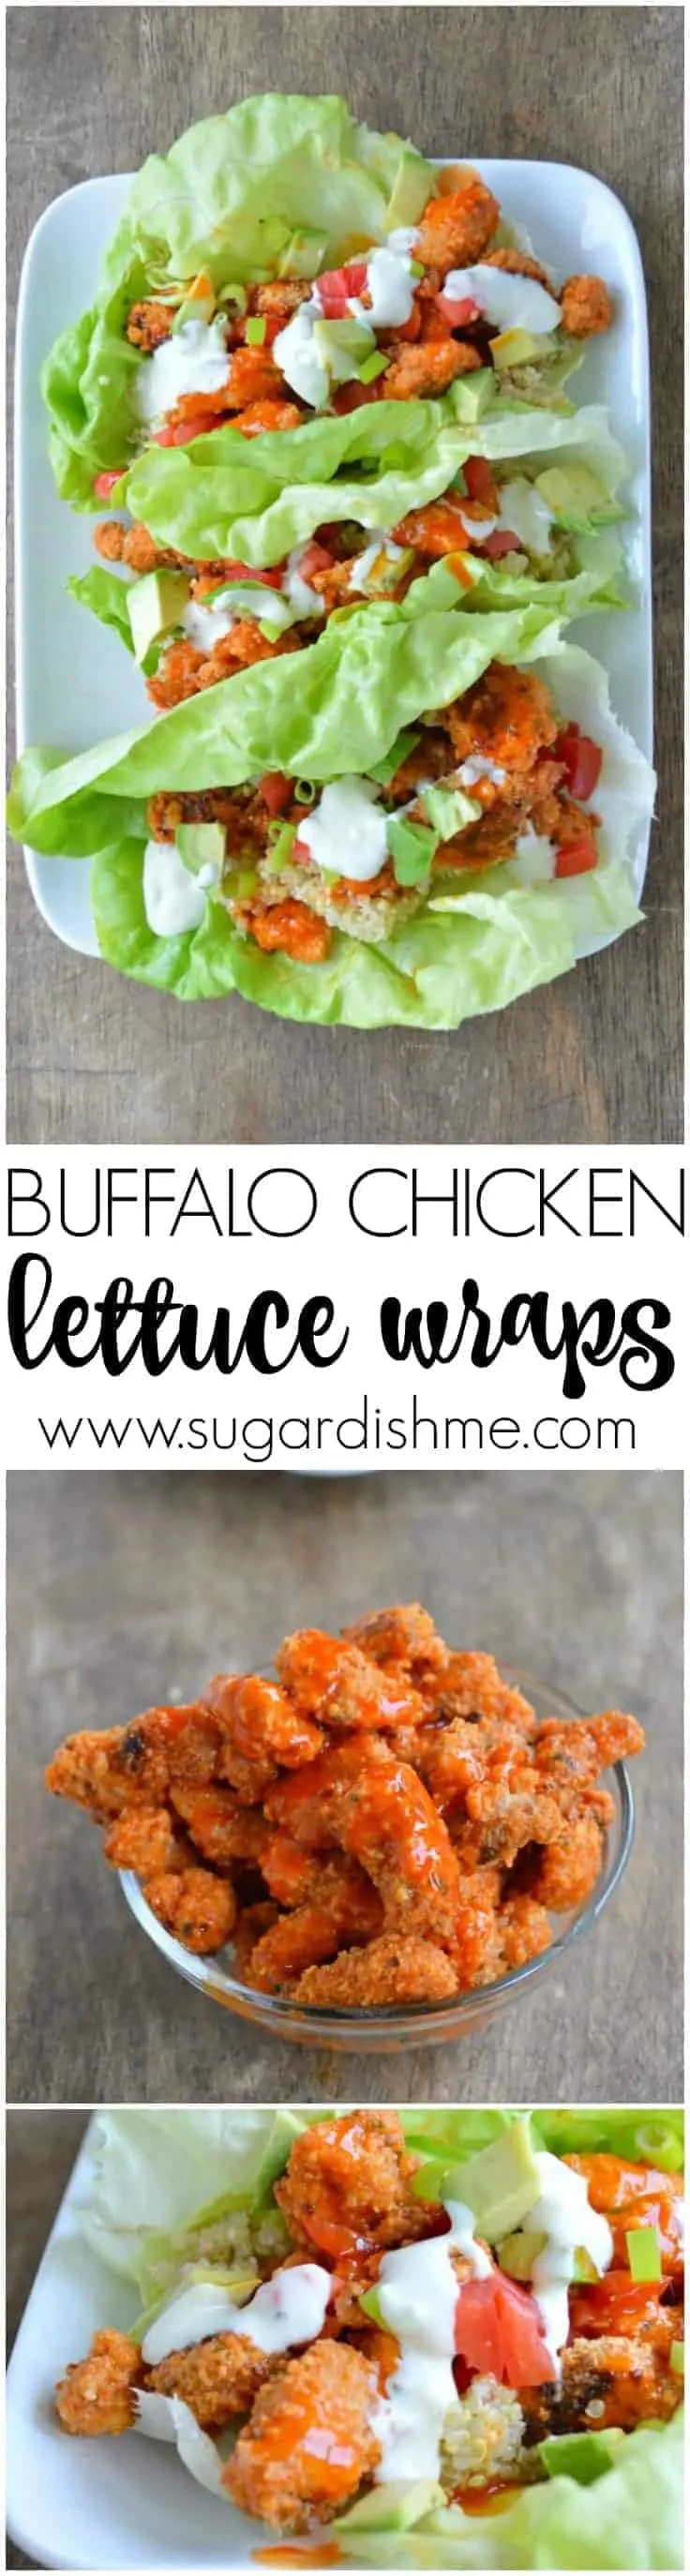 Buffalo Chicken Lettuce Wraps are fast, fresh, and healthy! This easy recipe has been featured on many healthy living sites, and has been #1 since 2014!